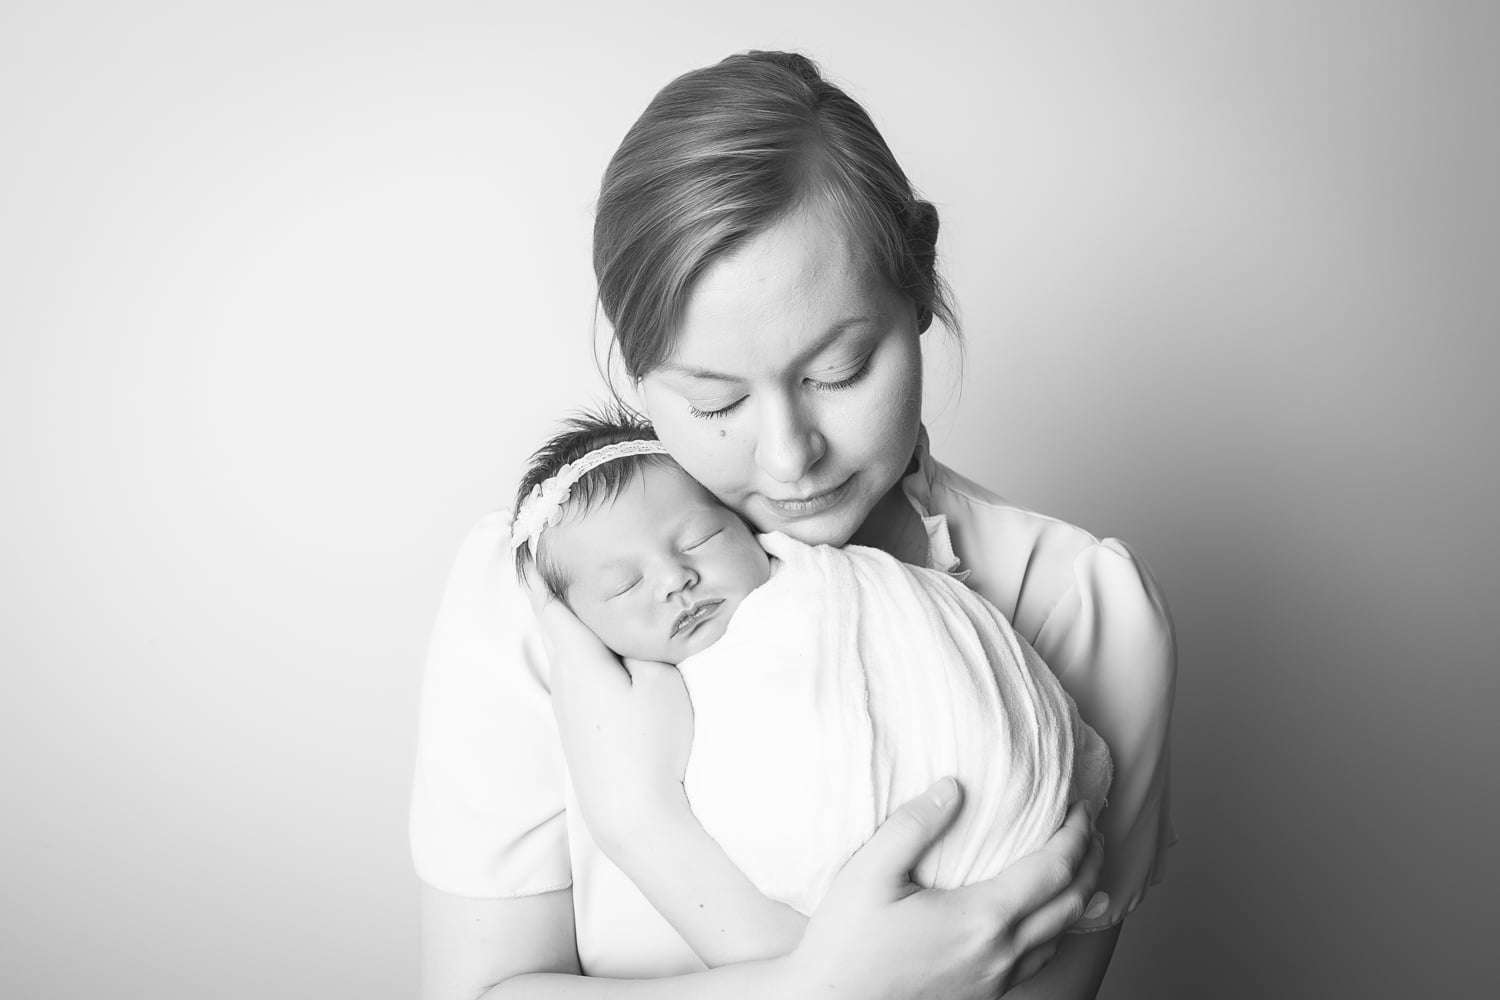 newborn photographer in rochester ny captures newborn baby girl sleeping in mom's arms